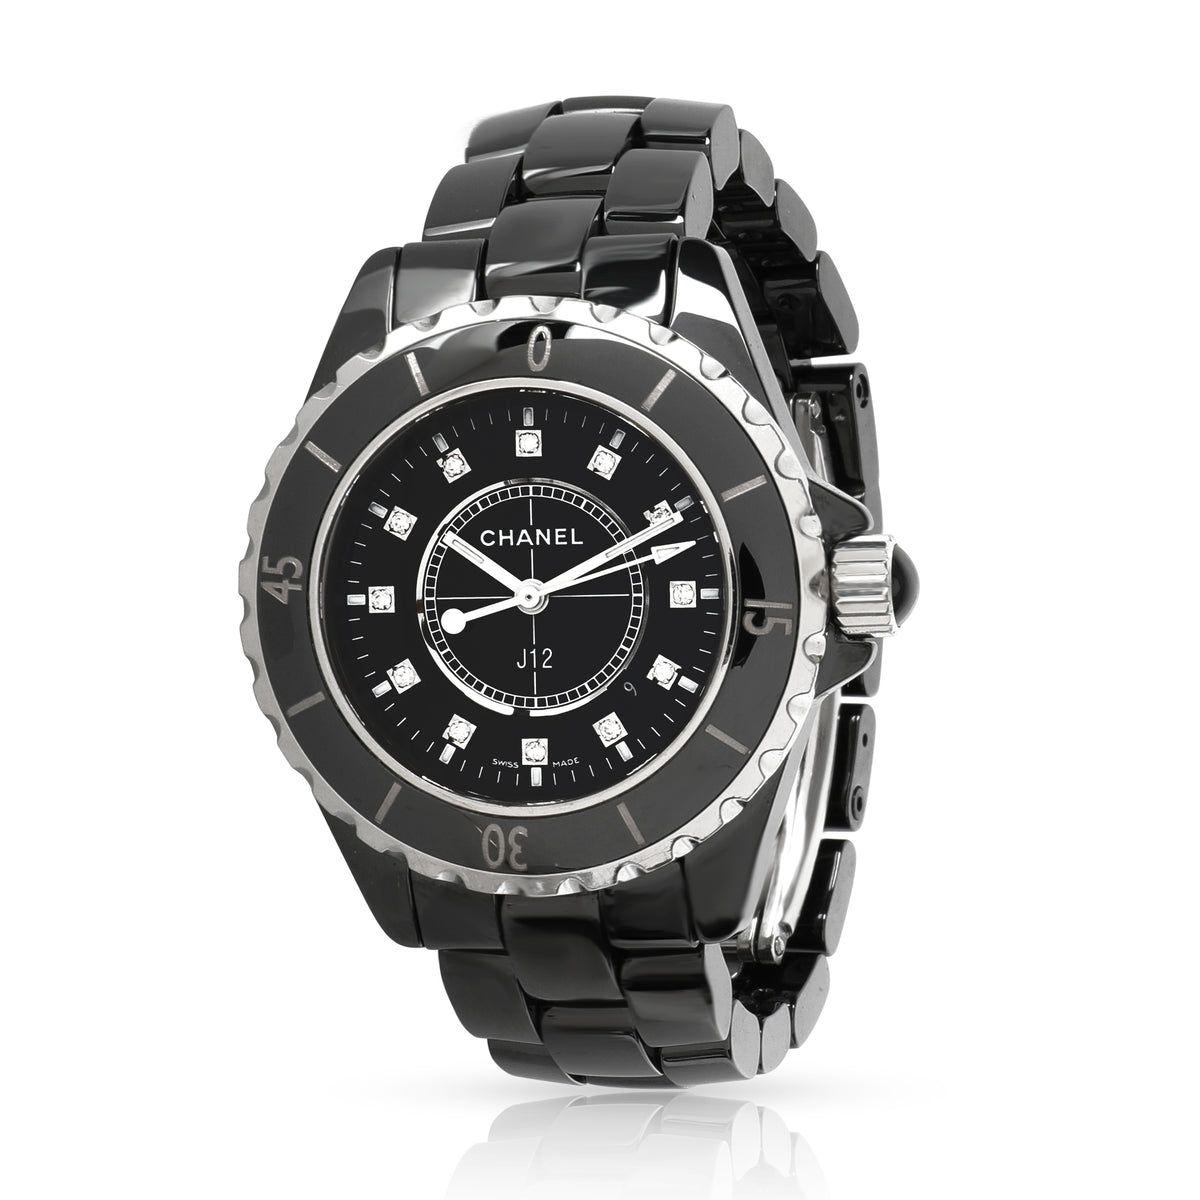 Chanel J12 Pre-owned, Dial Black Diamond, Size 33mm, H1625